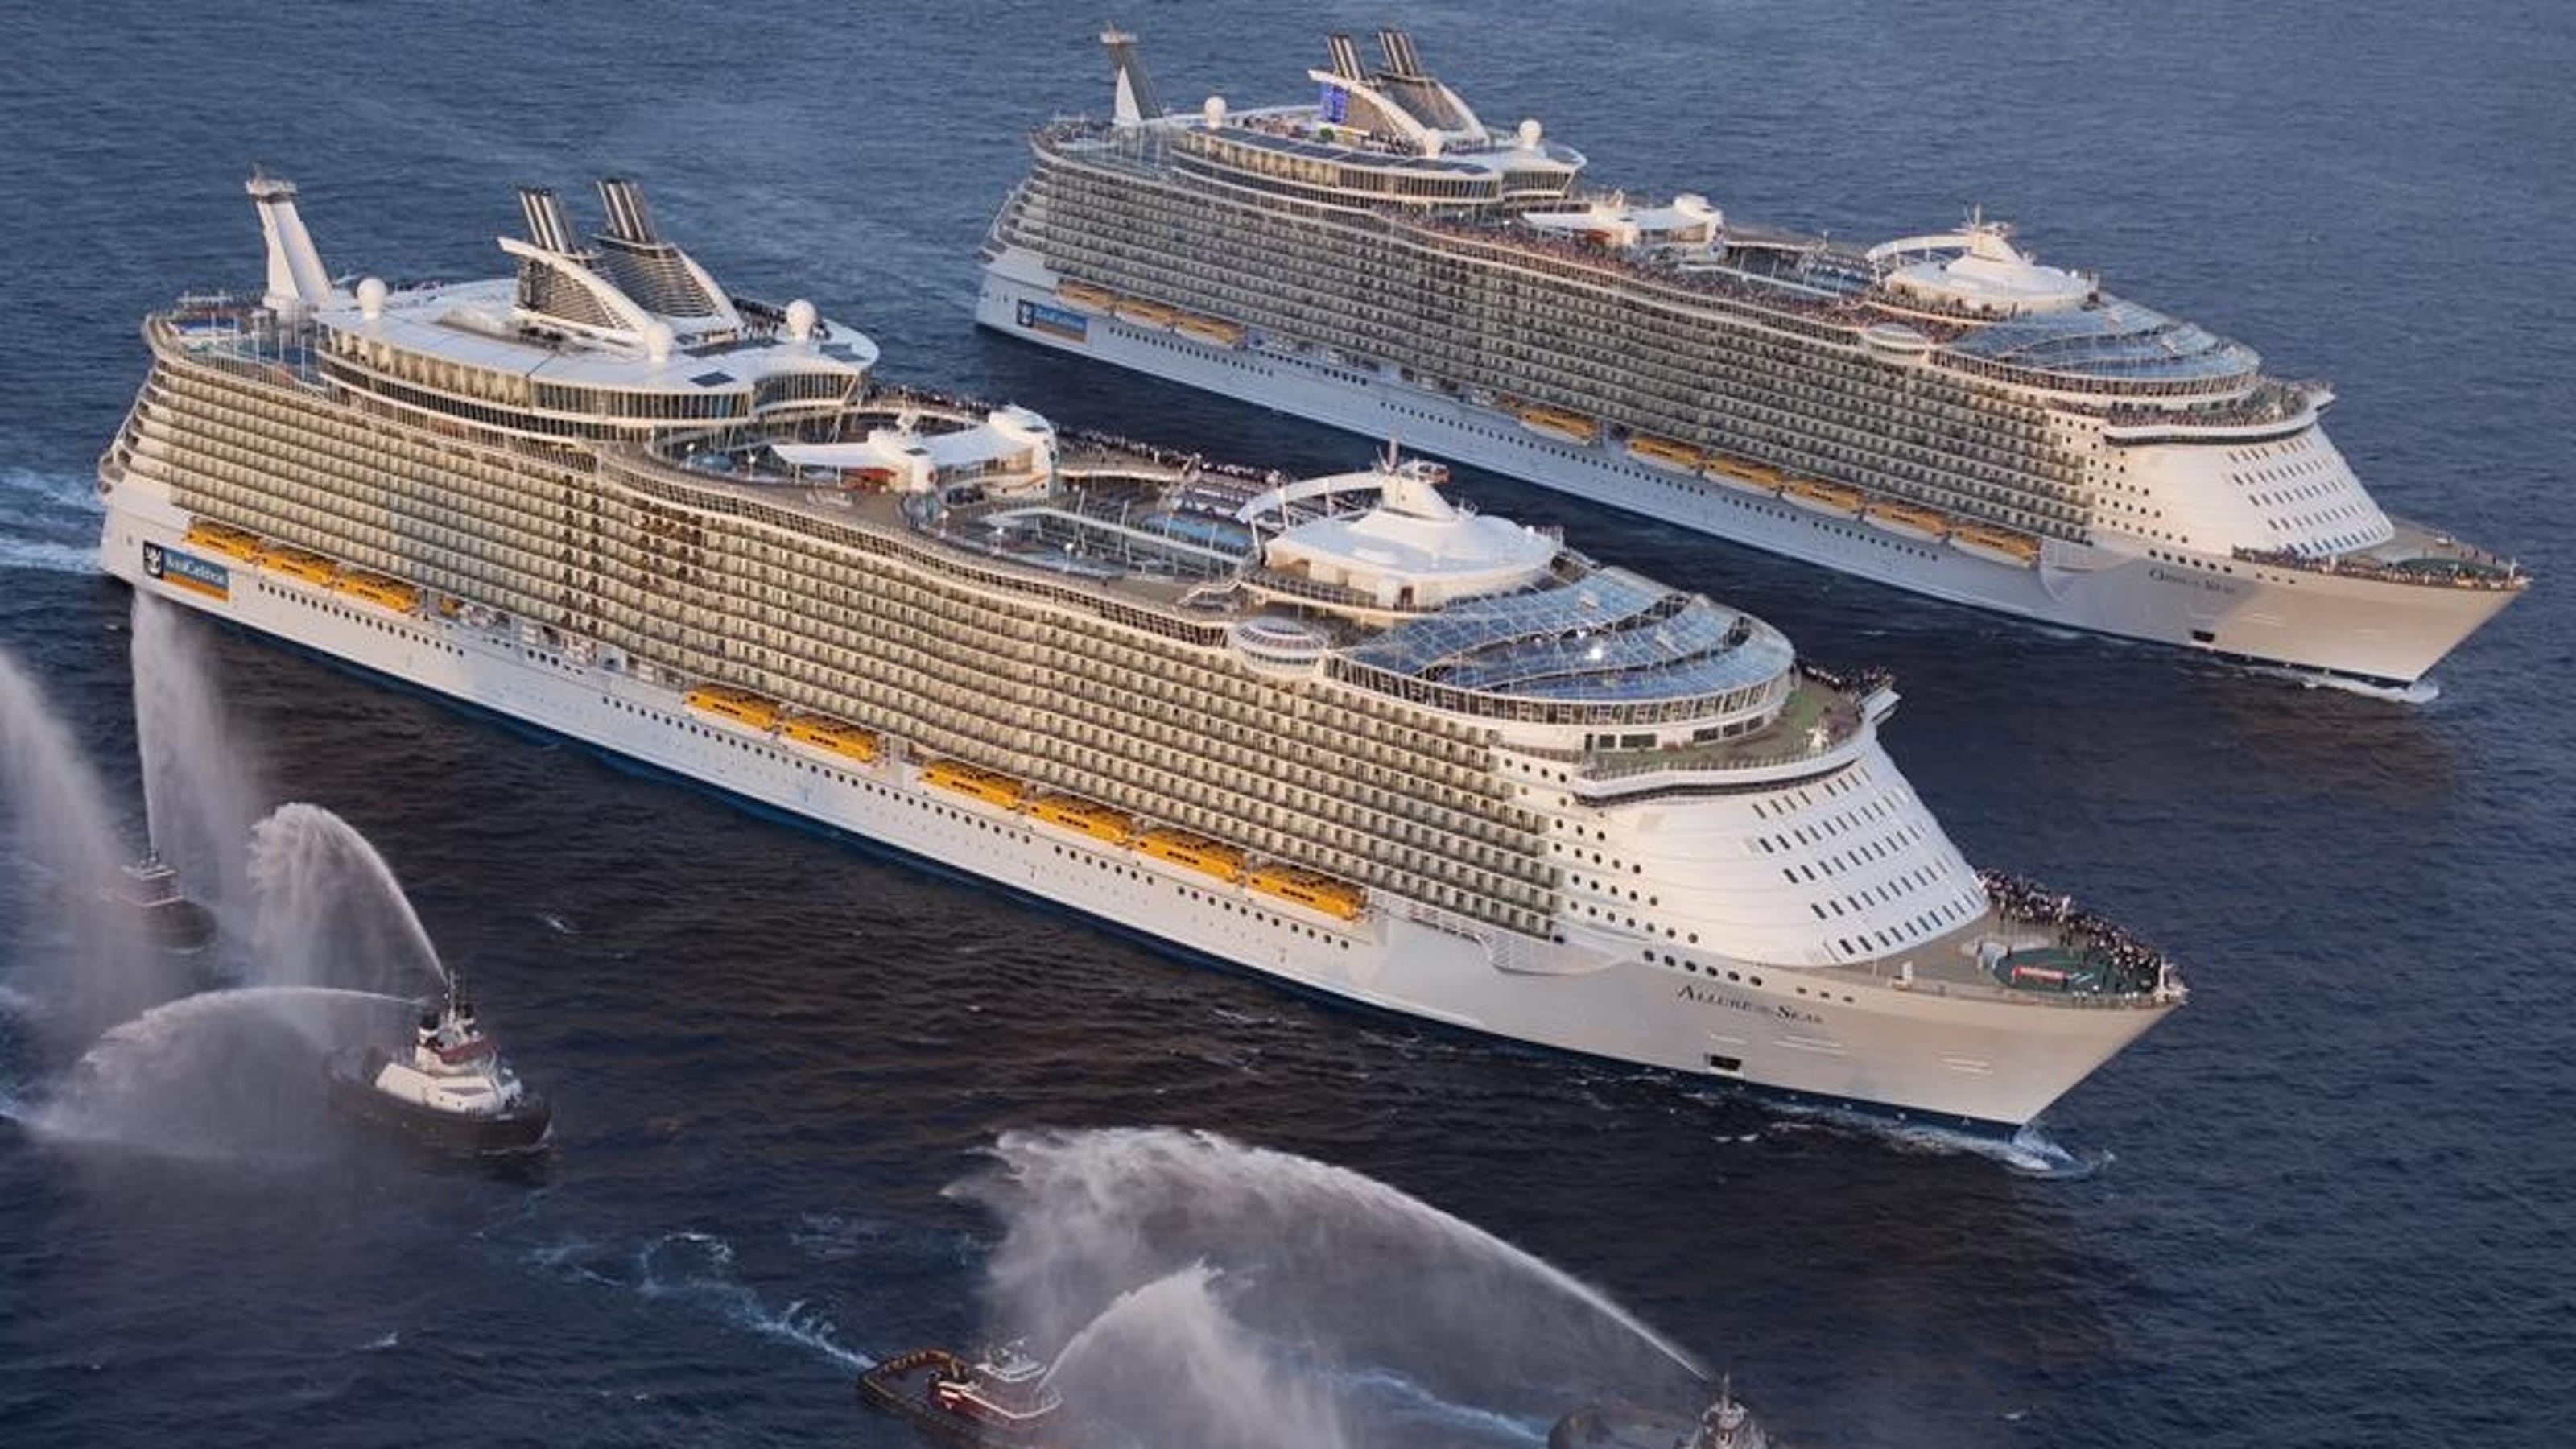 What Cruise Ship Is The Biggest In The World Cruise Everyday